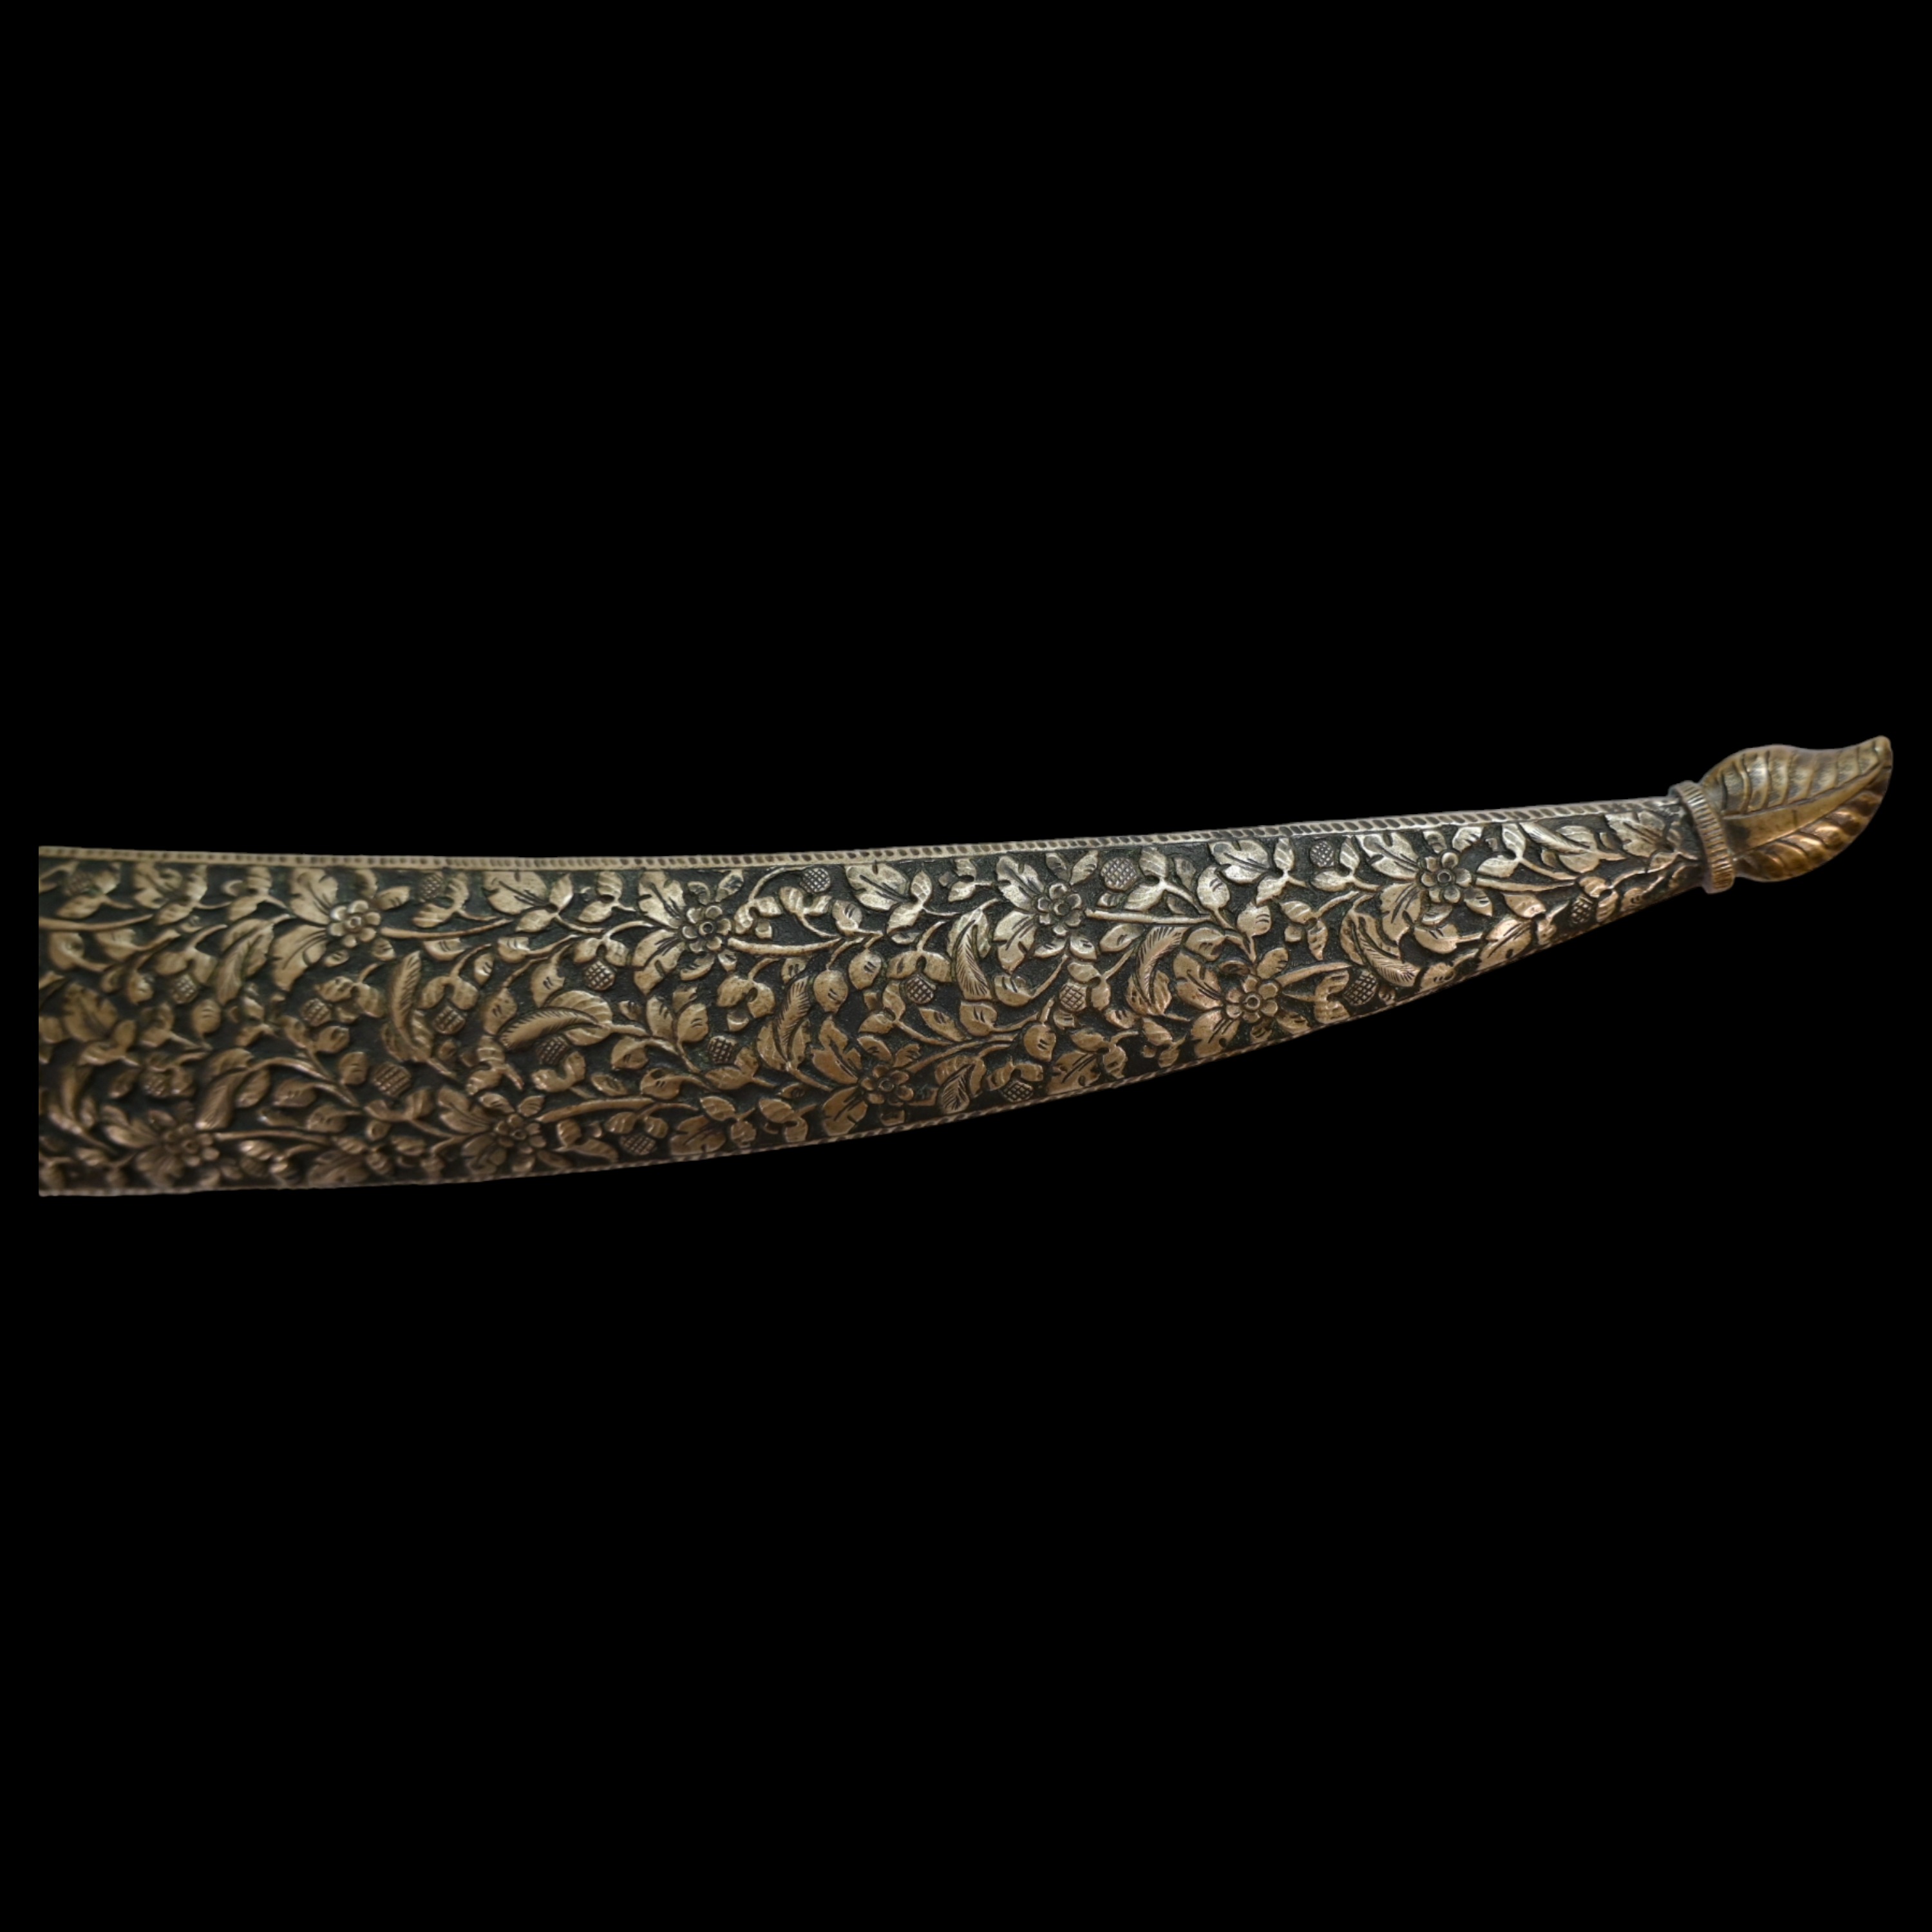 Very rare Dagger with jade handle, Wootz blade, precious stones and gold, Ottoman Empire, 18th C. - Image 6 of 19